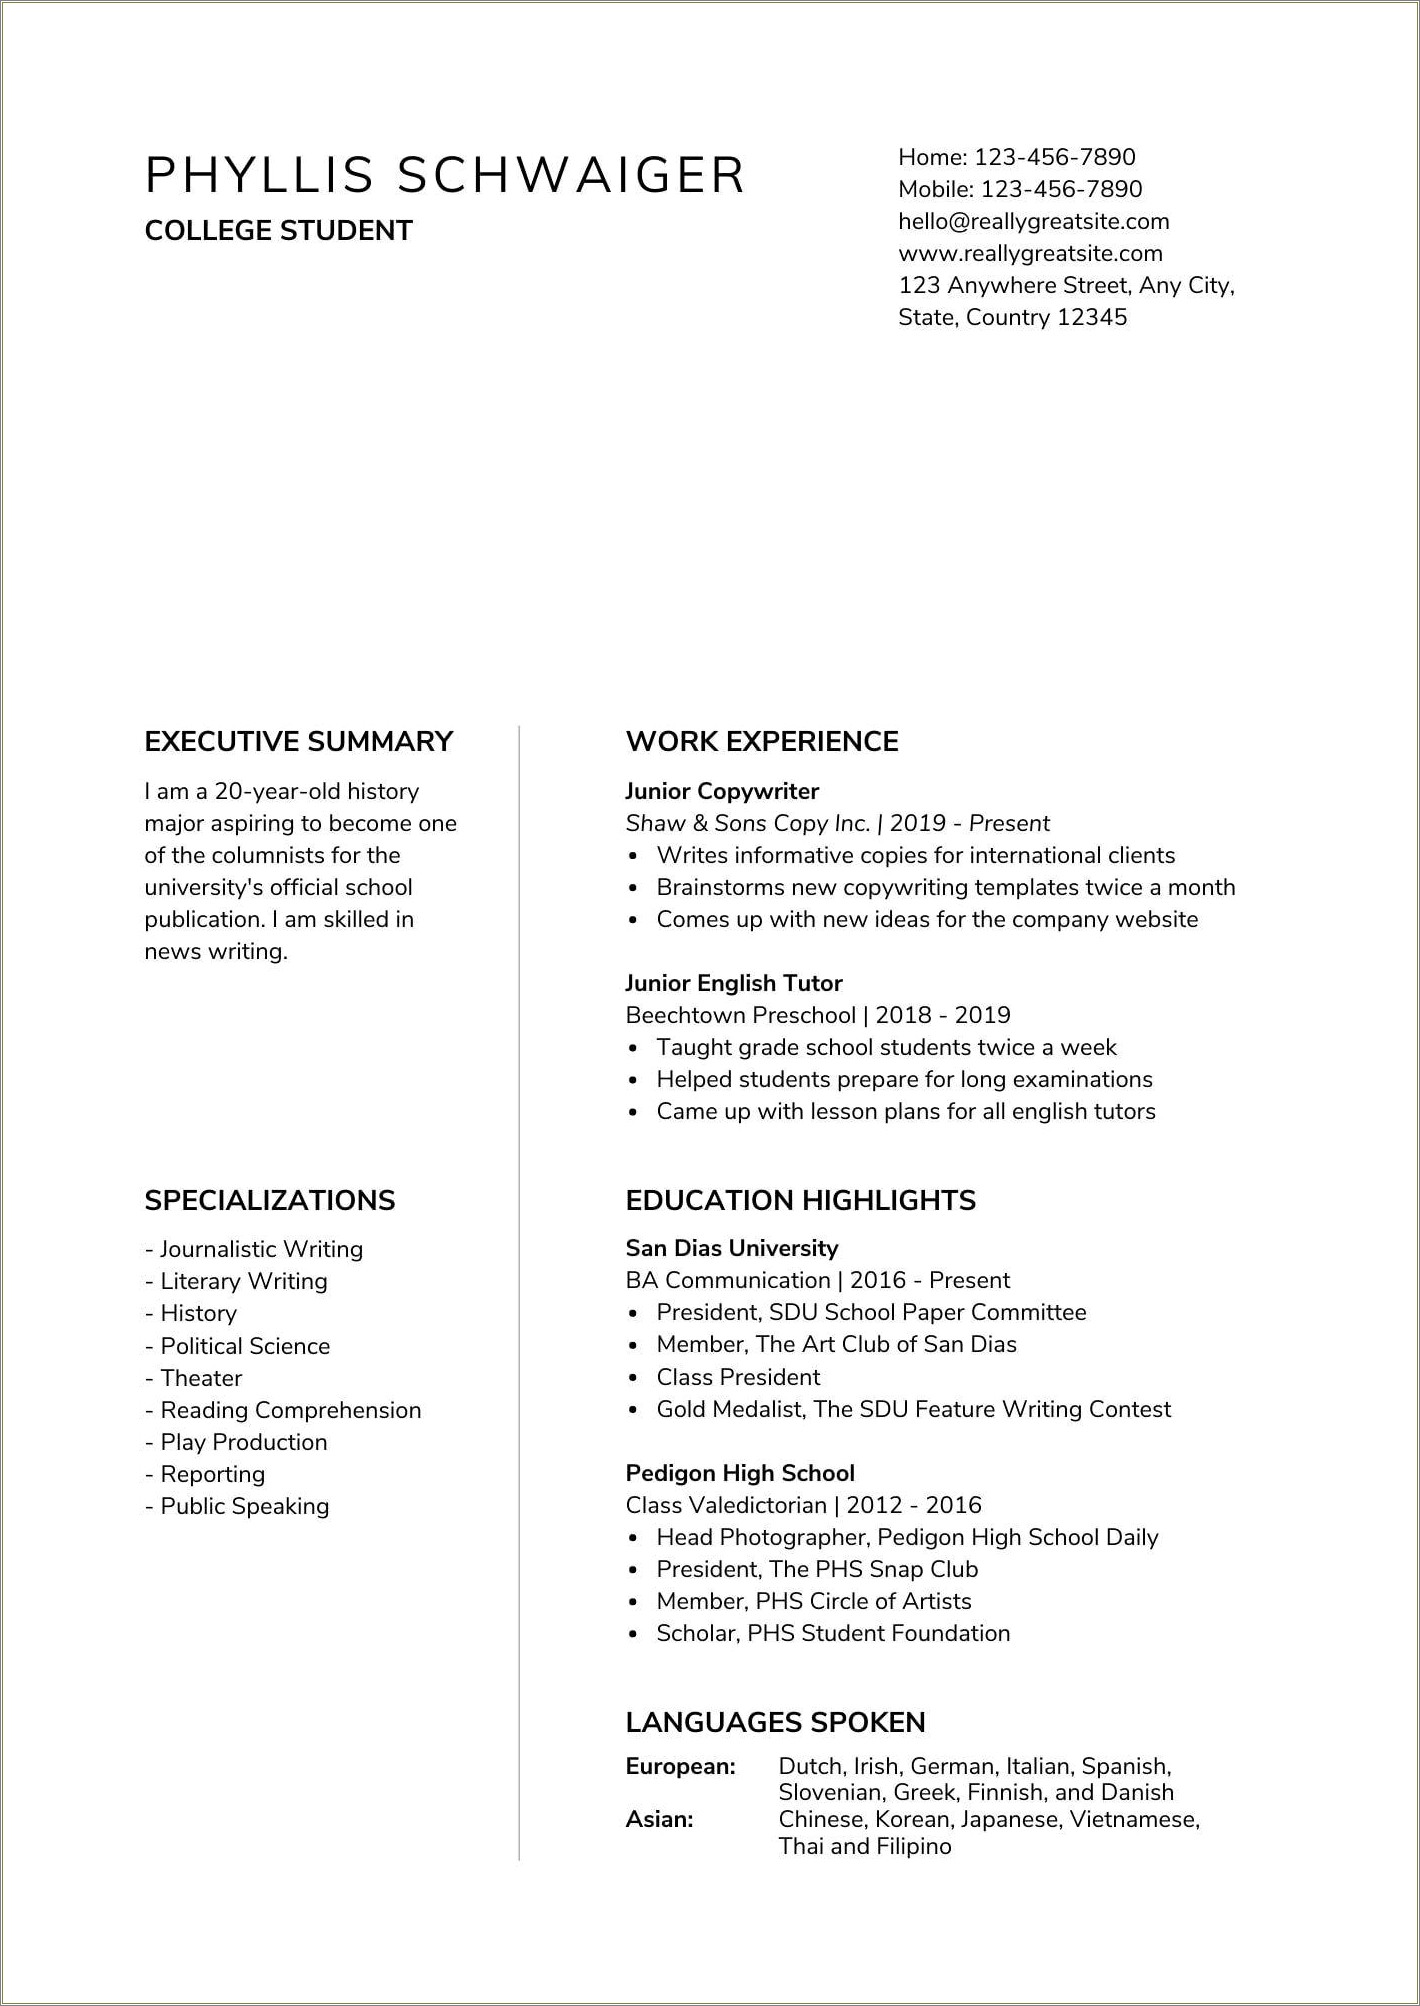 Fresh Out Of College Resume Template